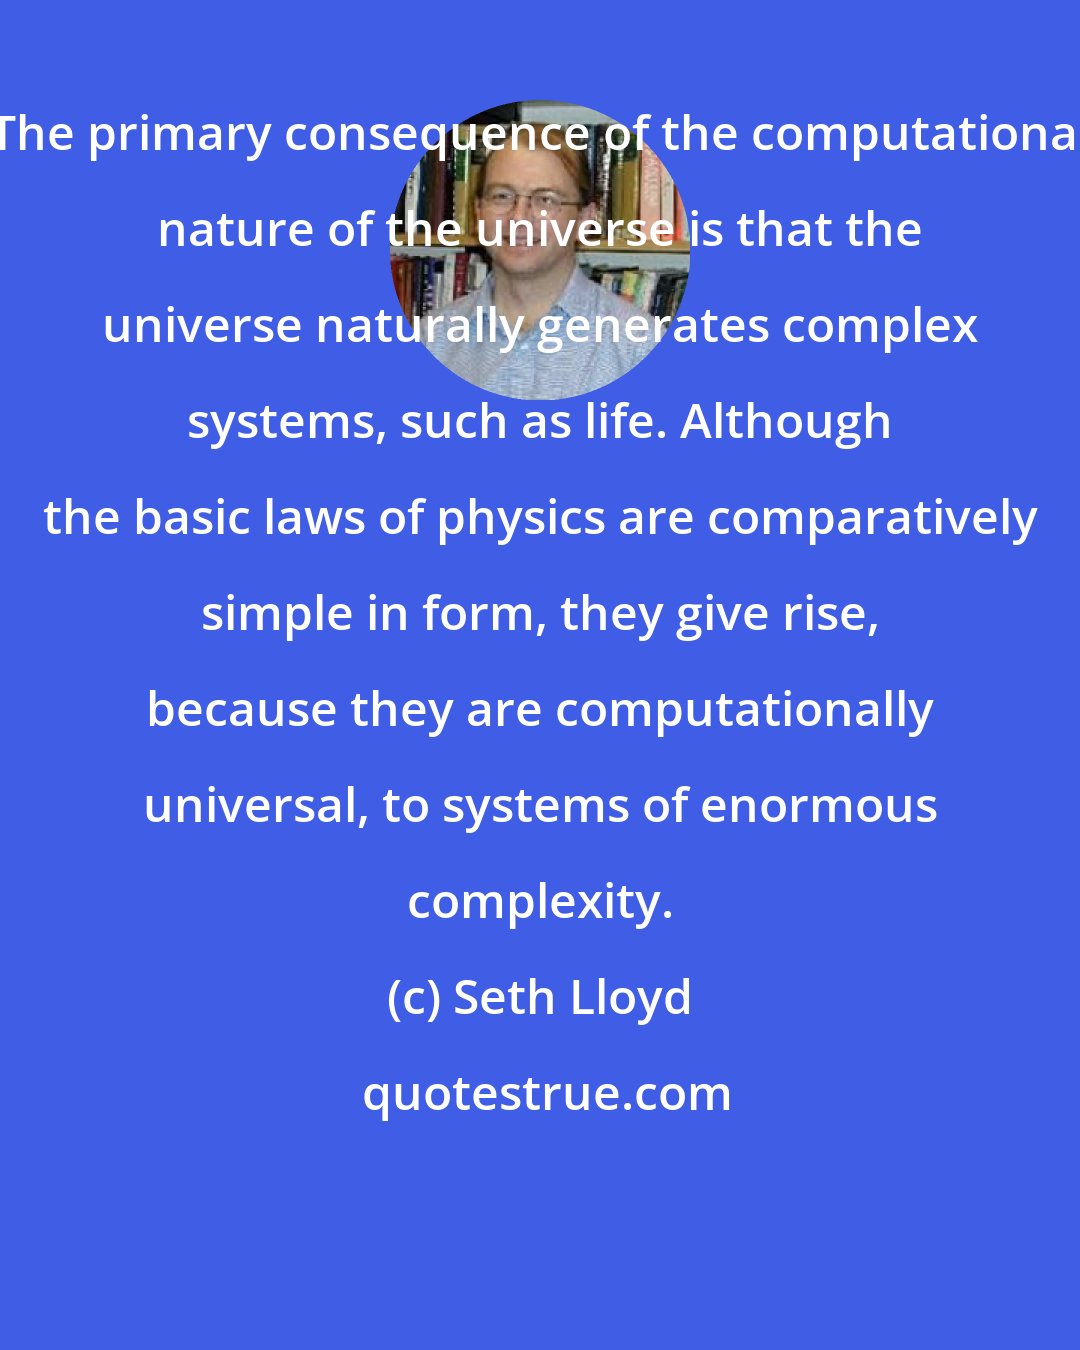 Seth Lloyd: The primary consequence of the computational nature of the universe is that the universe naturally generates complex systems, such as life. Although the basic laws of physics are comparatively simple in form, they give rise, because they are computationally universal, to systems of enormous complexity.